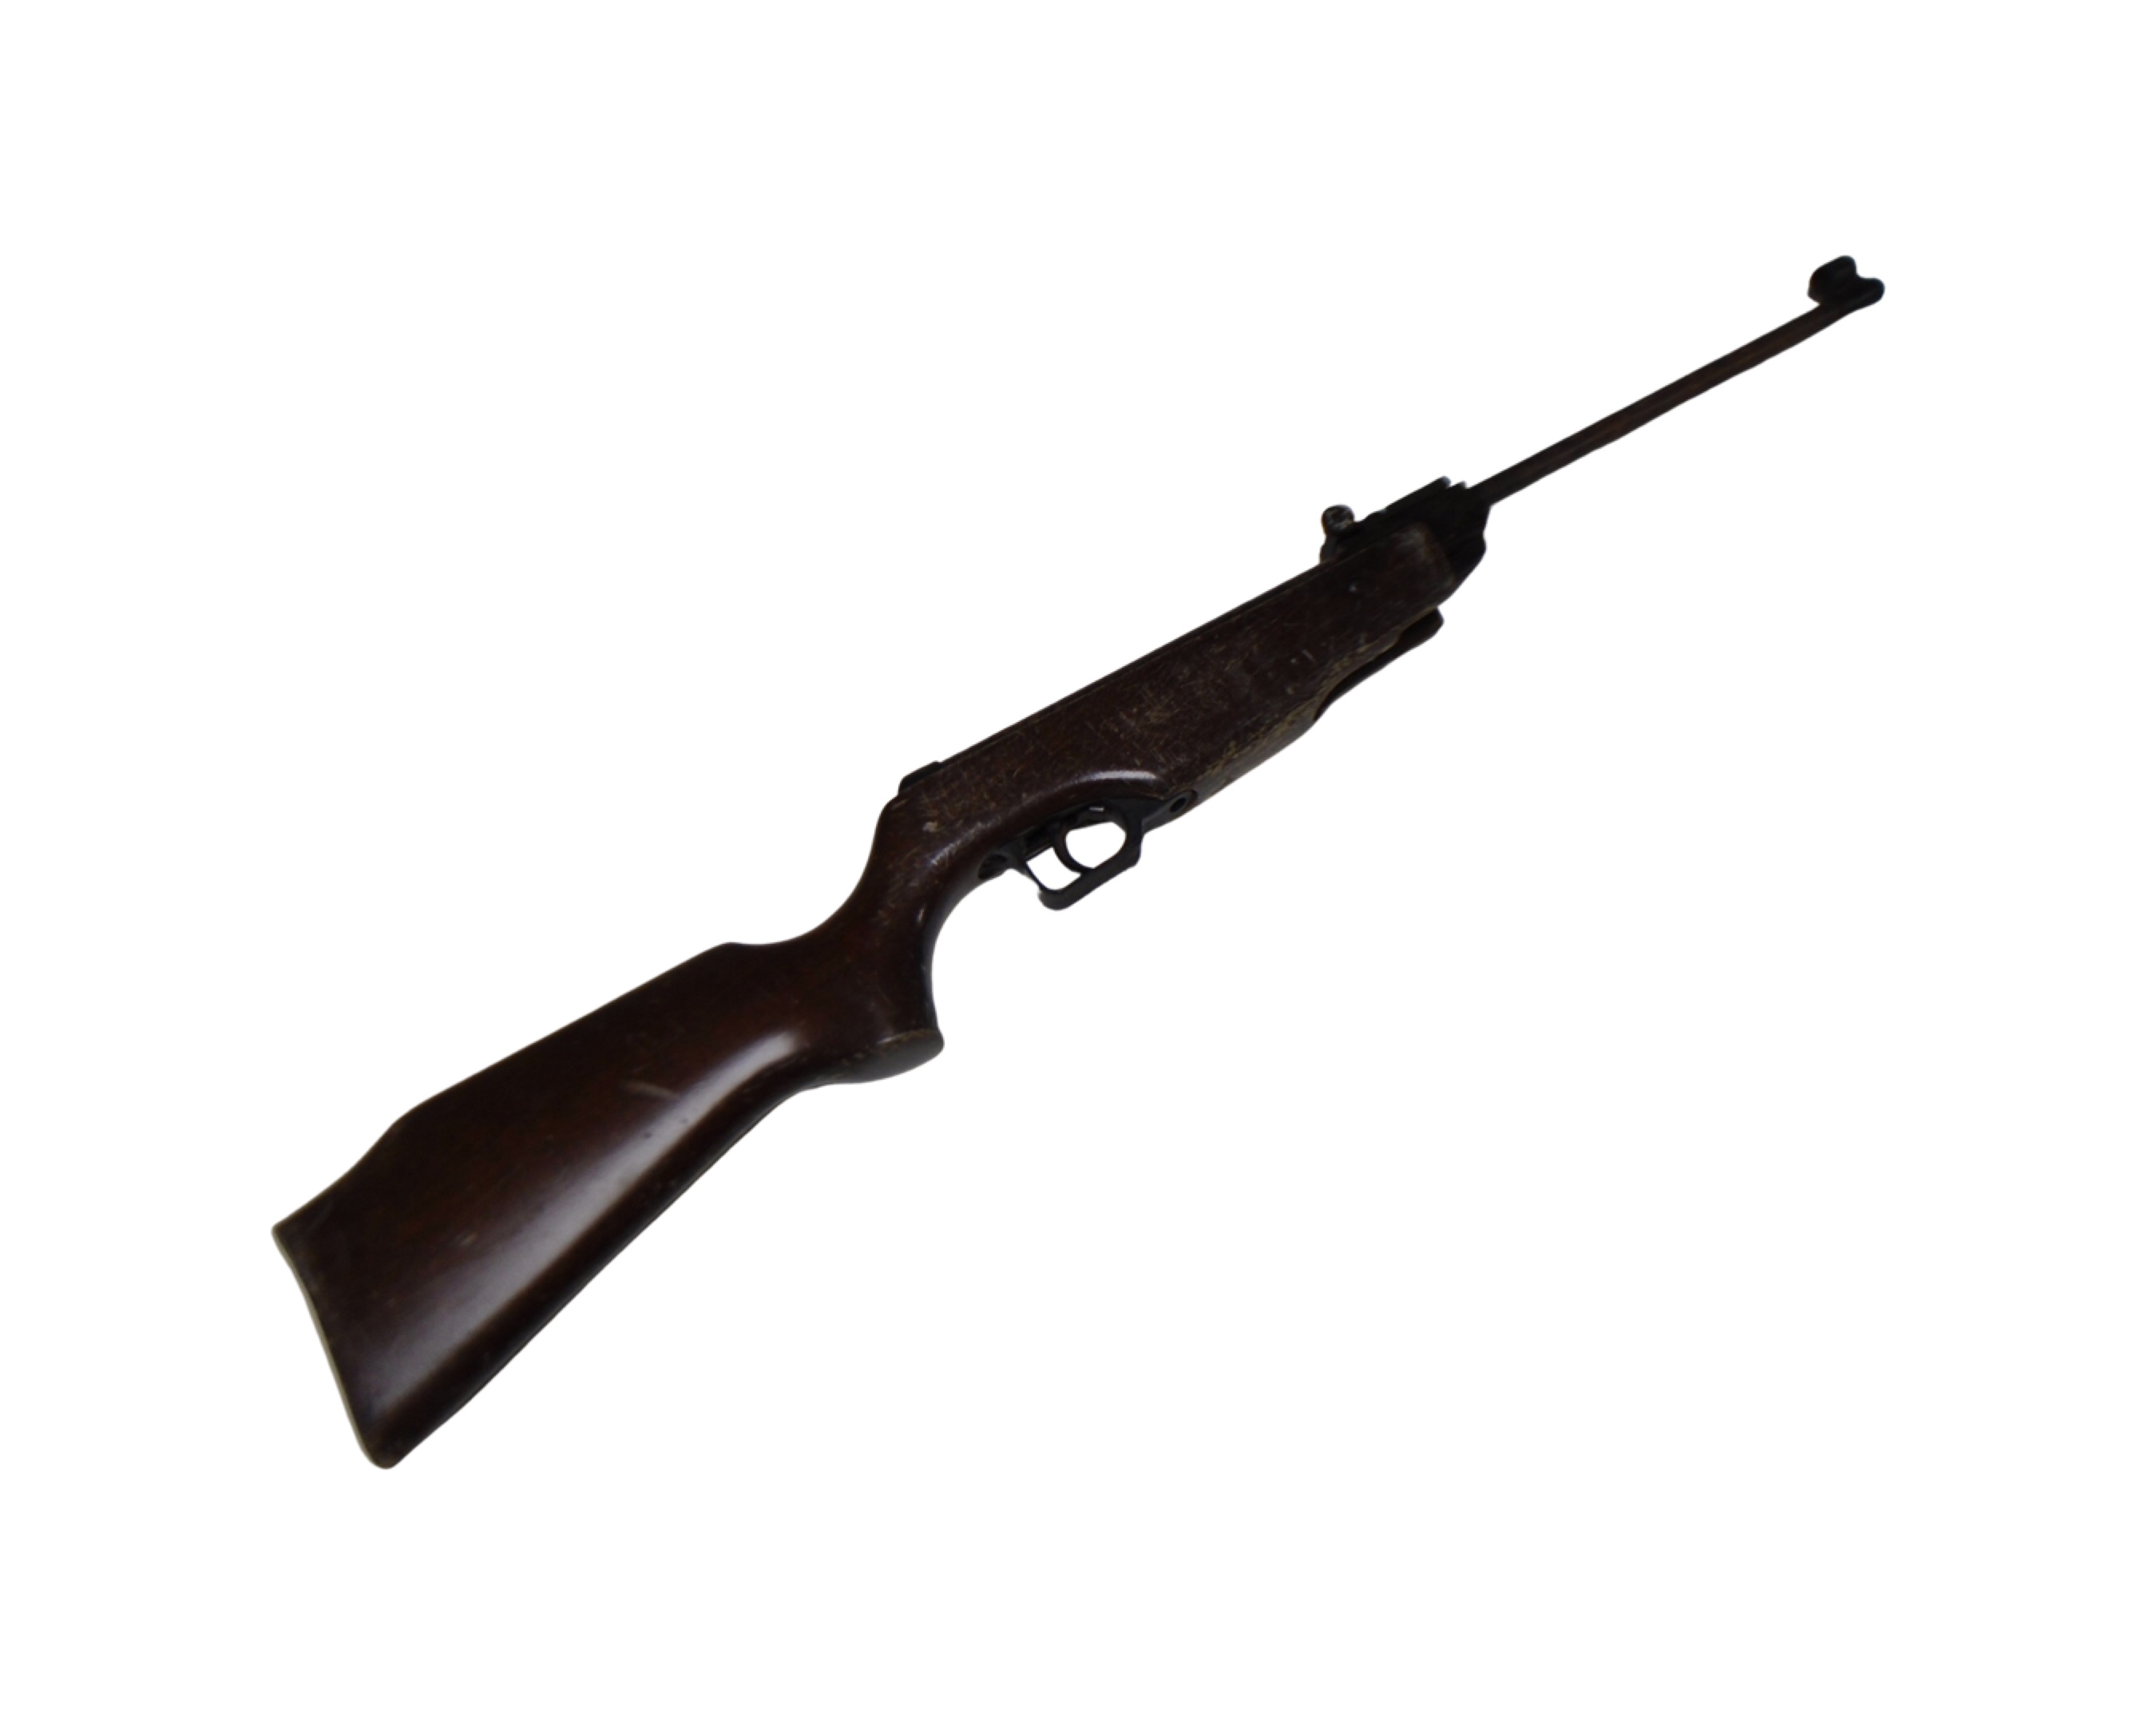 A vintage Norica model 56 air rifle.